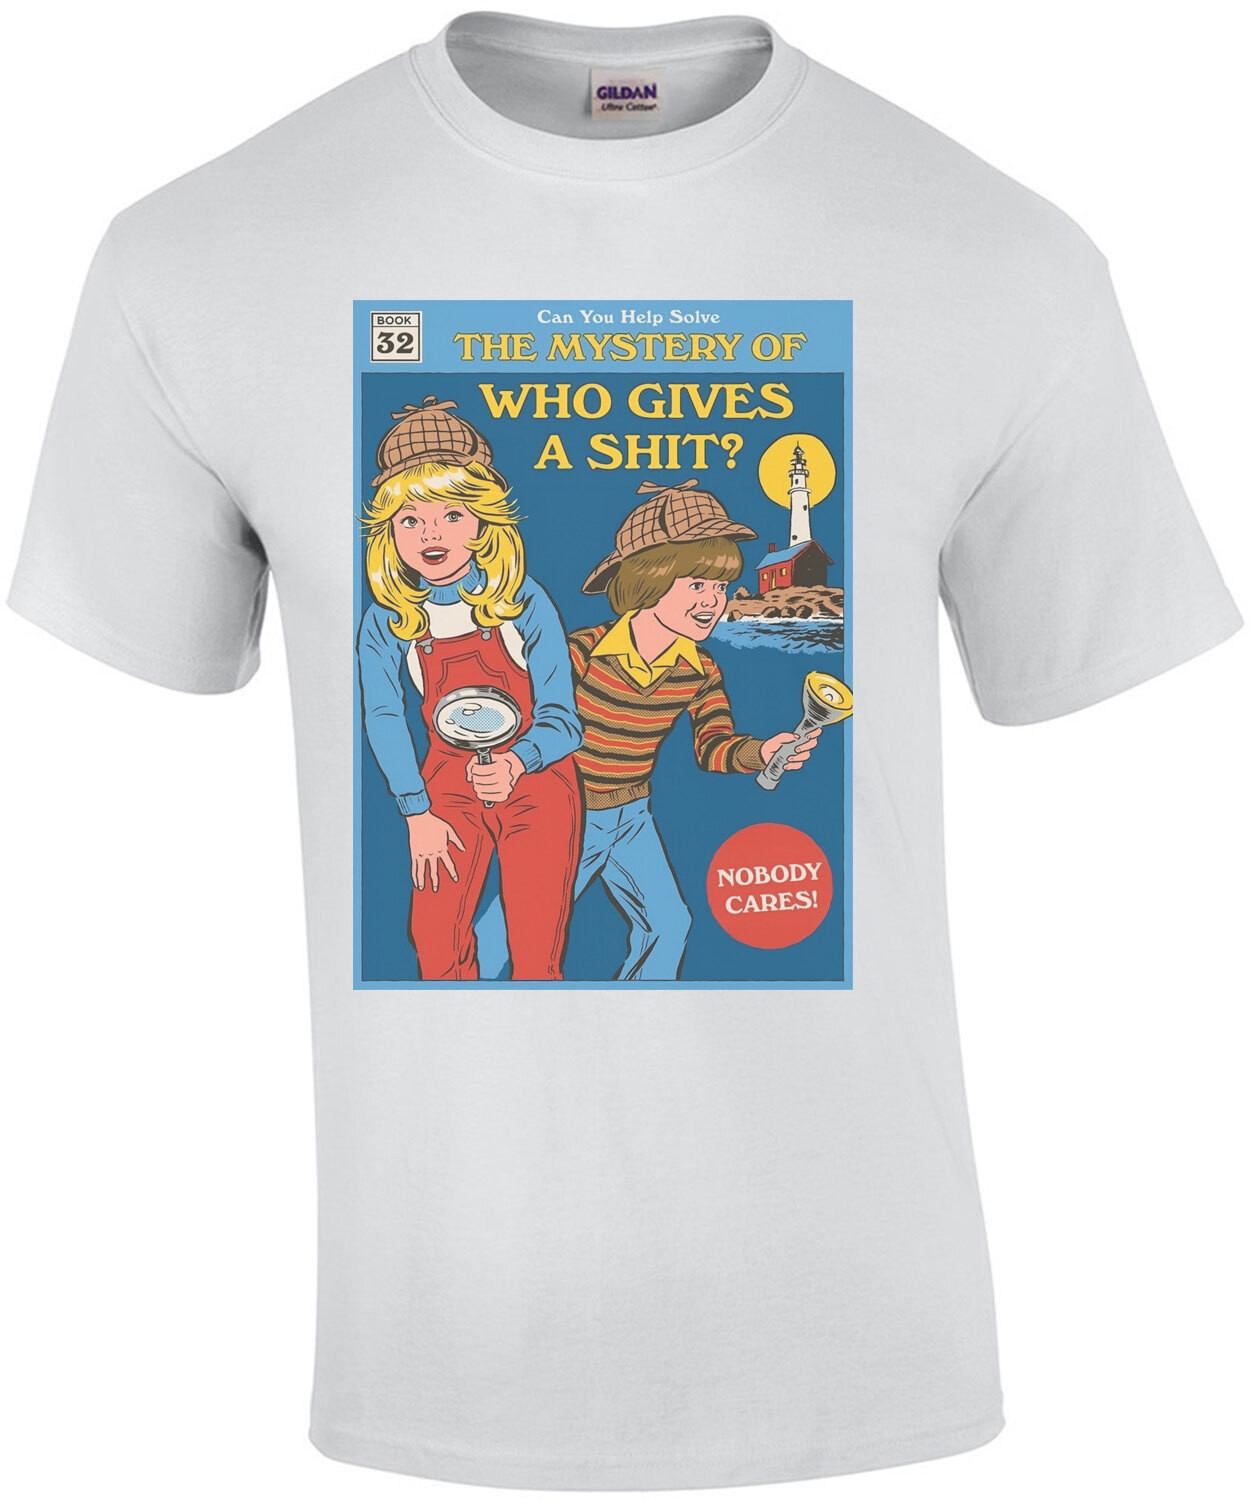 Can you help solve the mystery of who gives a shit? Funny Sarcastic T-Shirt